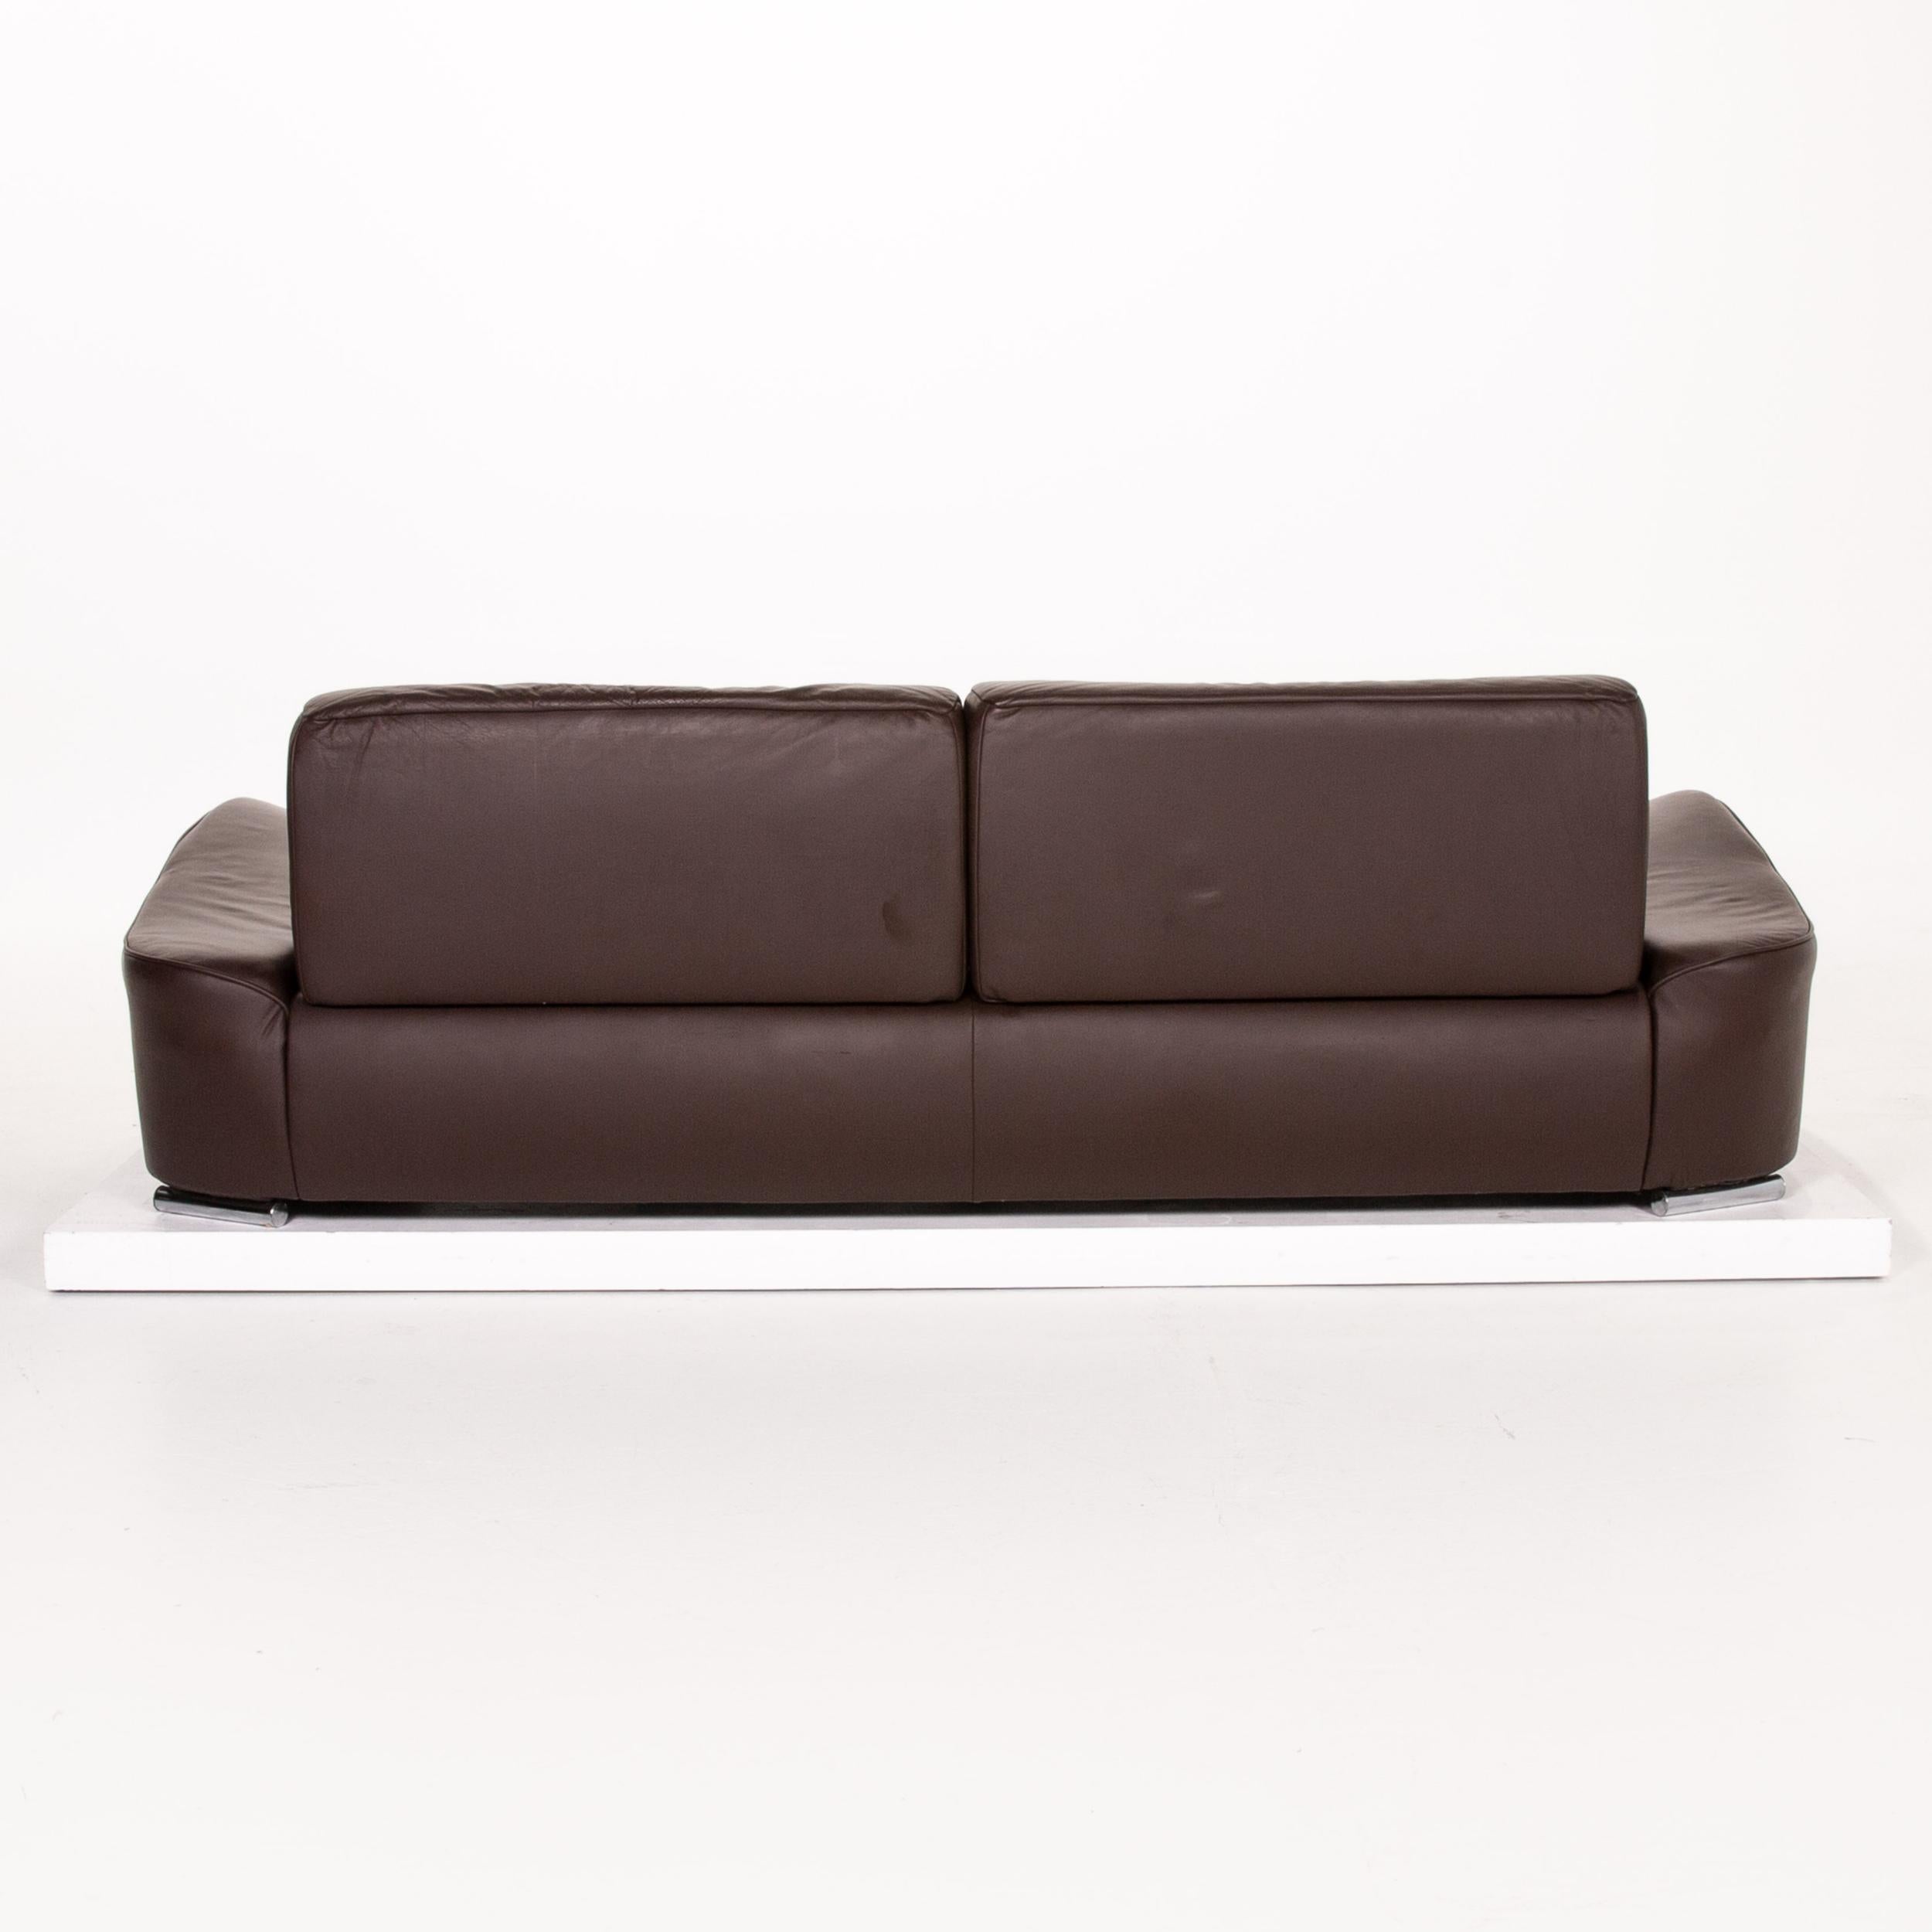 Sample Ring Leather Sofa Brown Dark Brown Three-Seat Couch 10